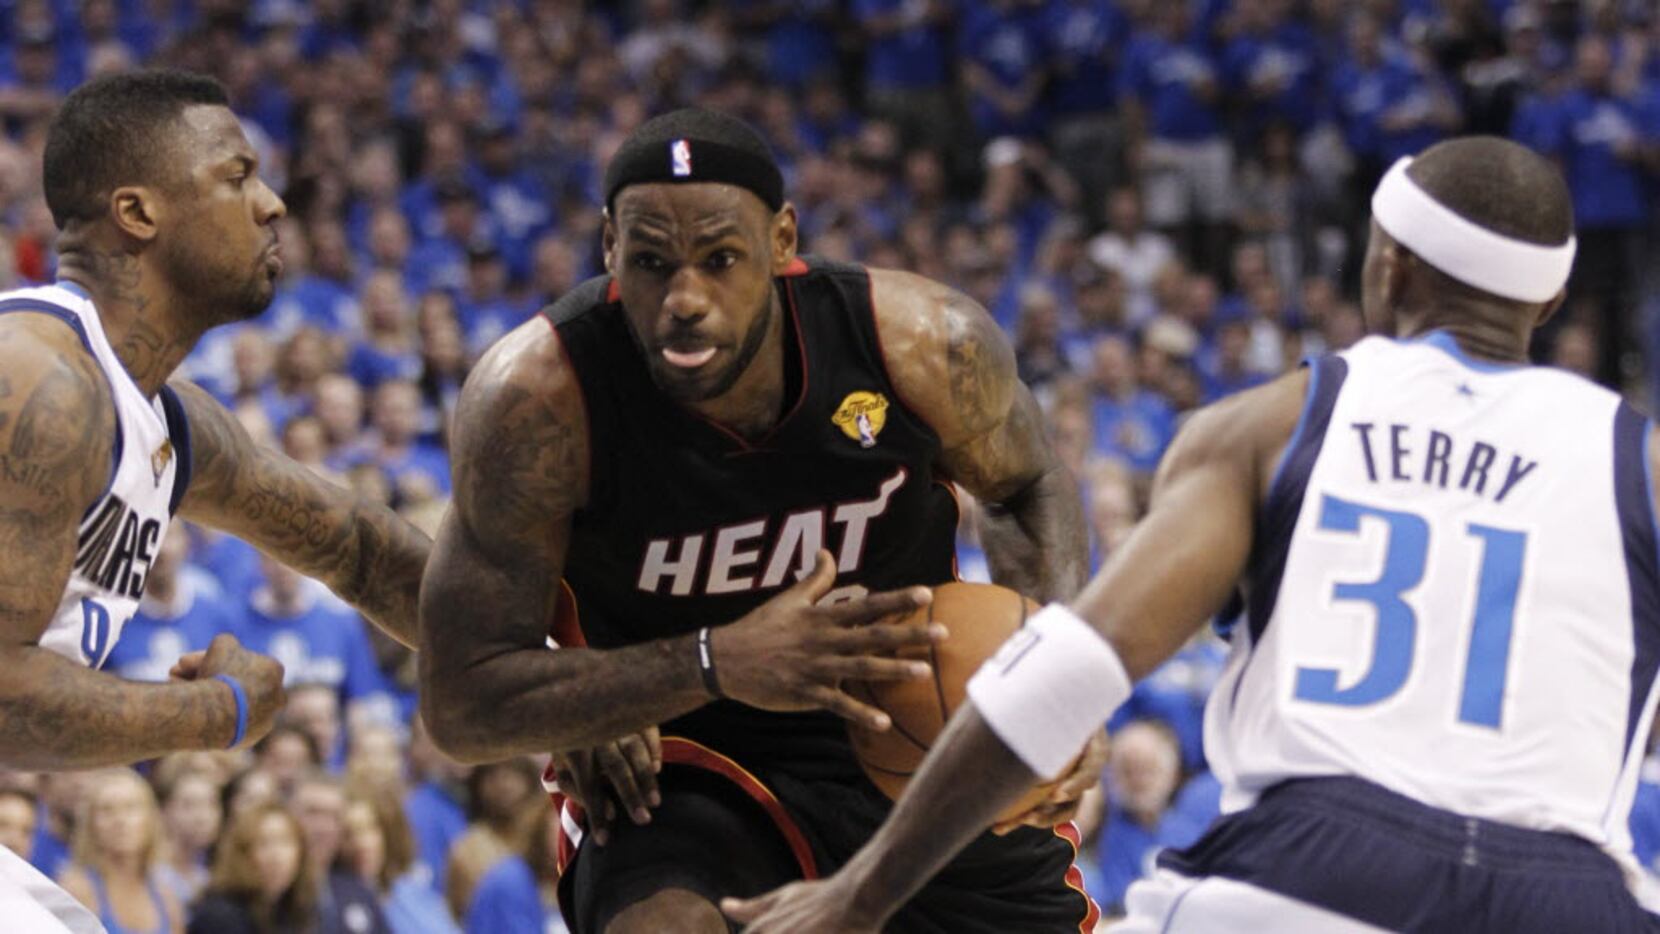 LeBron James admits 2011 Finals loss vs. Dallas Mavericks was the toughest  one in his career - Basketball Network - Your daily dose of basketball